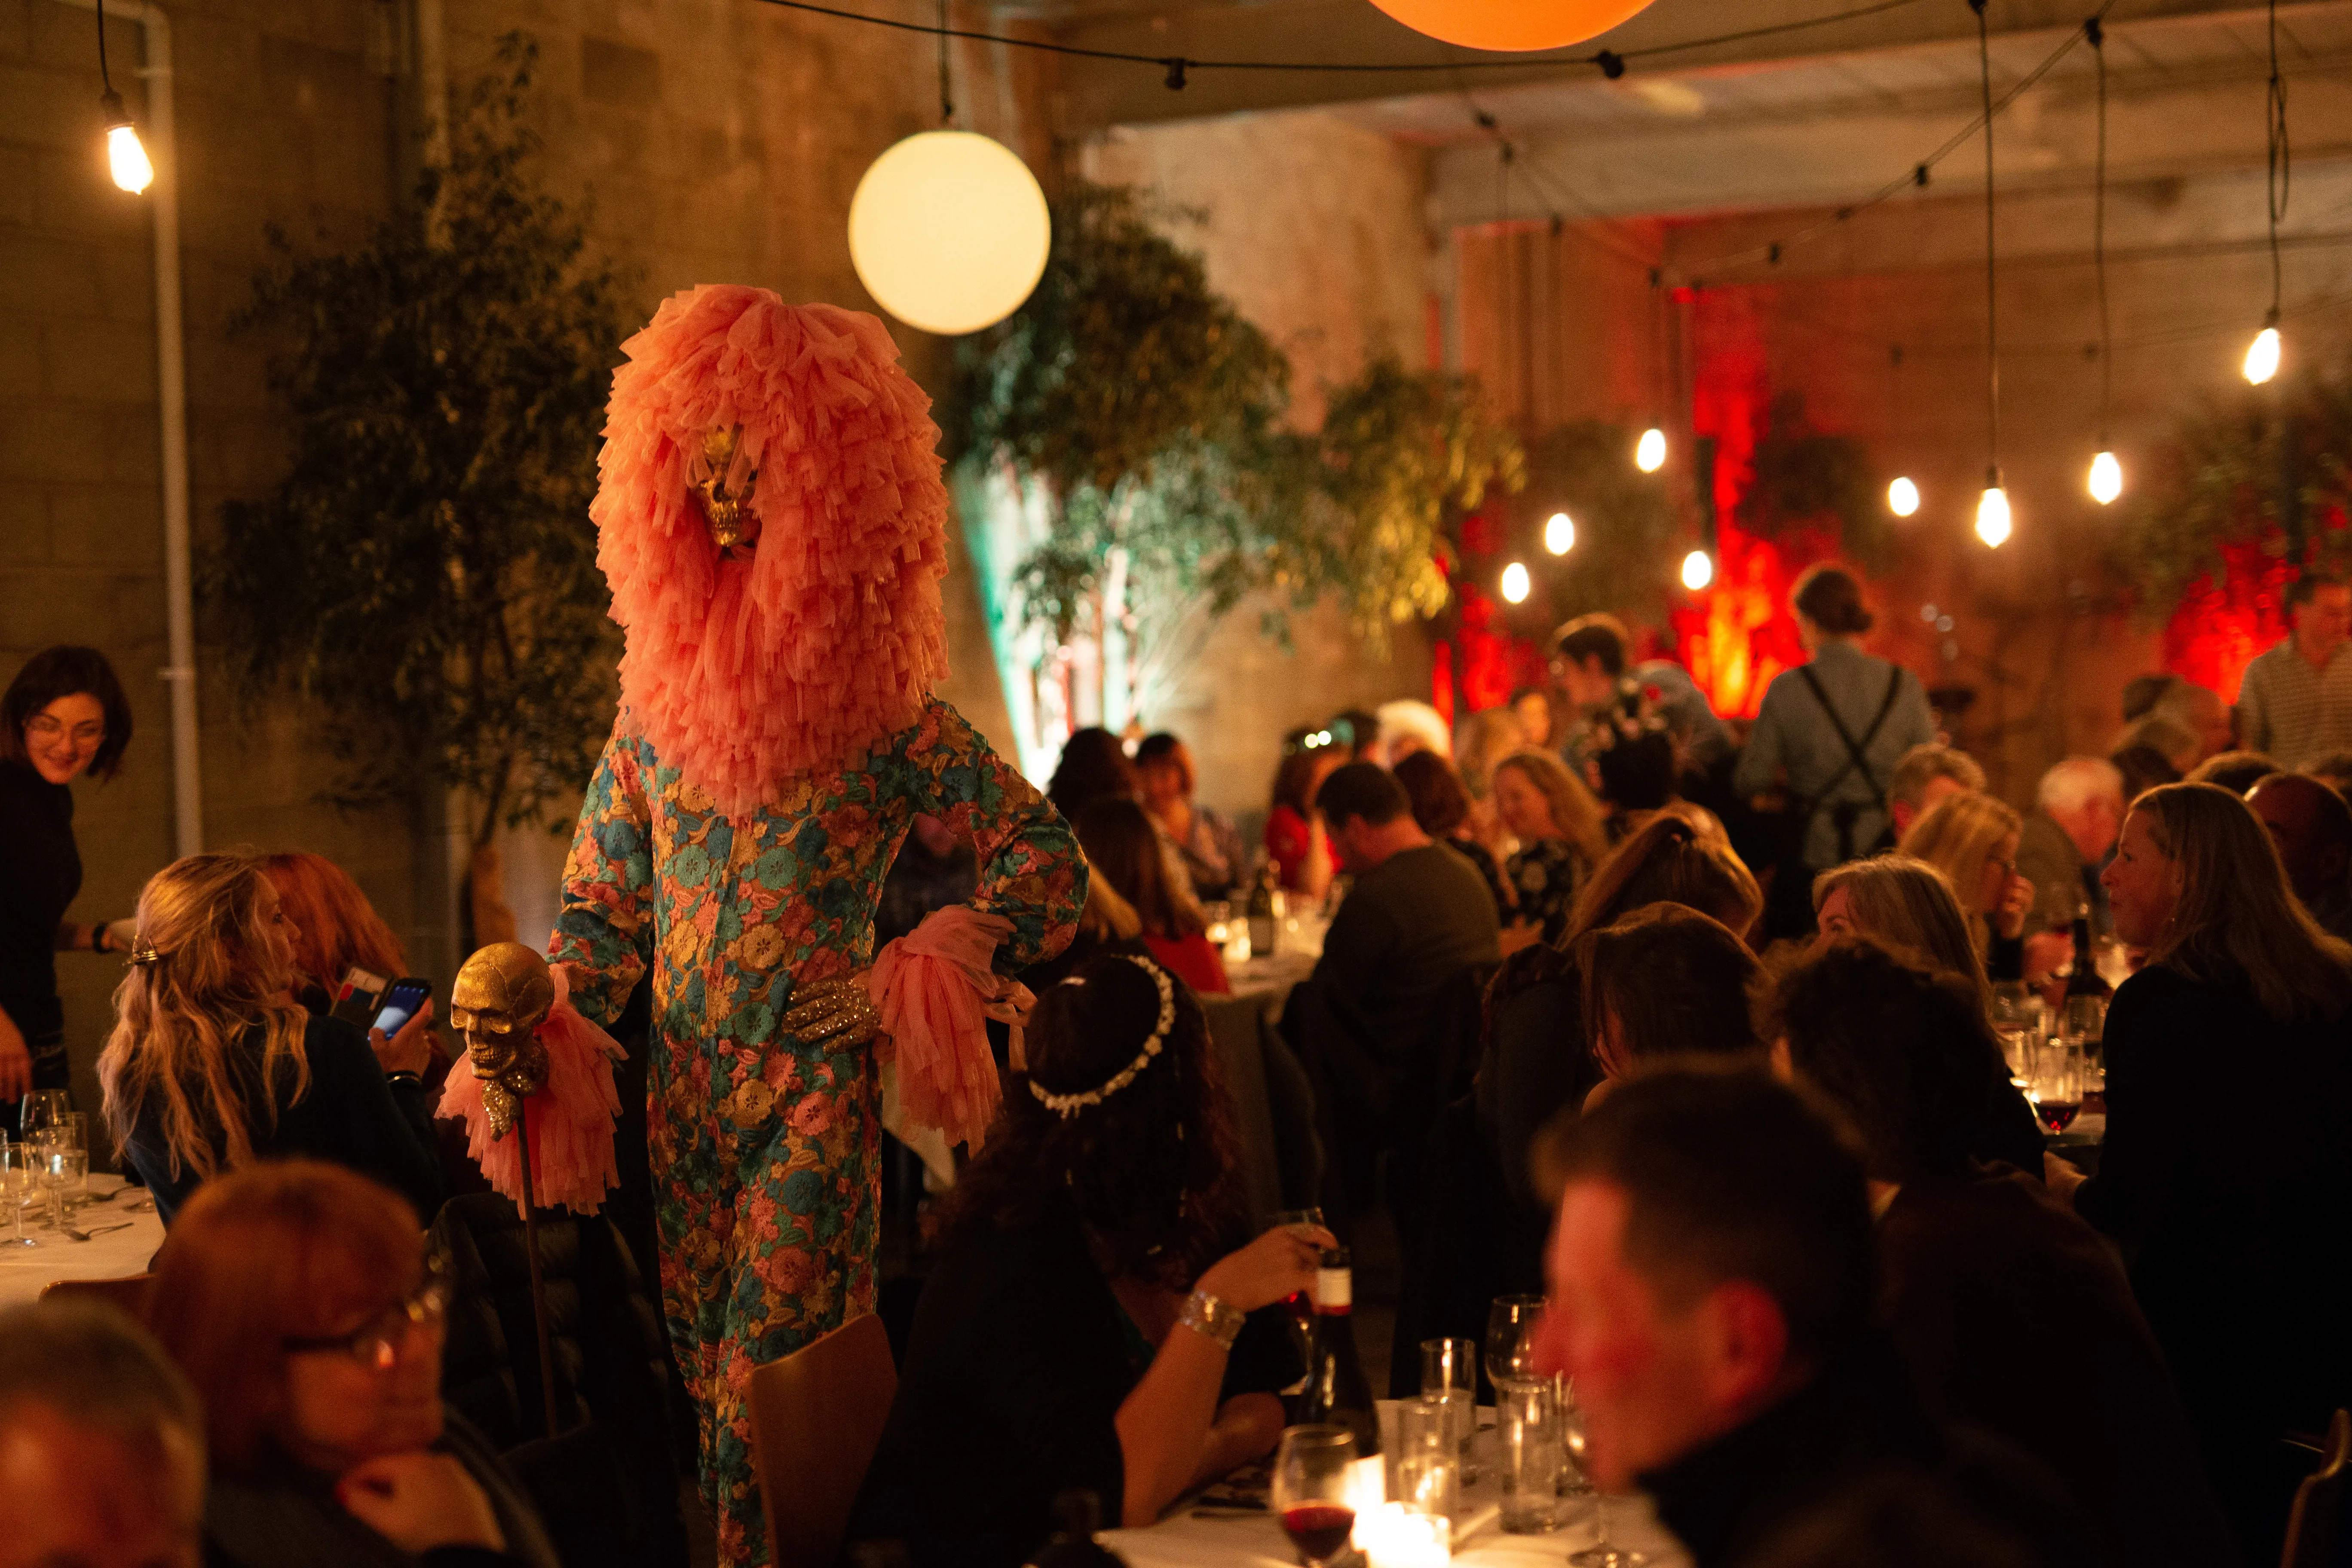 A strangely costumed person walks among busy dinner tables at an event.